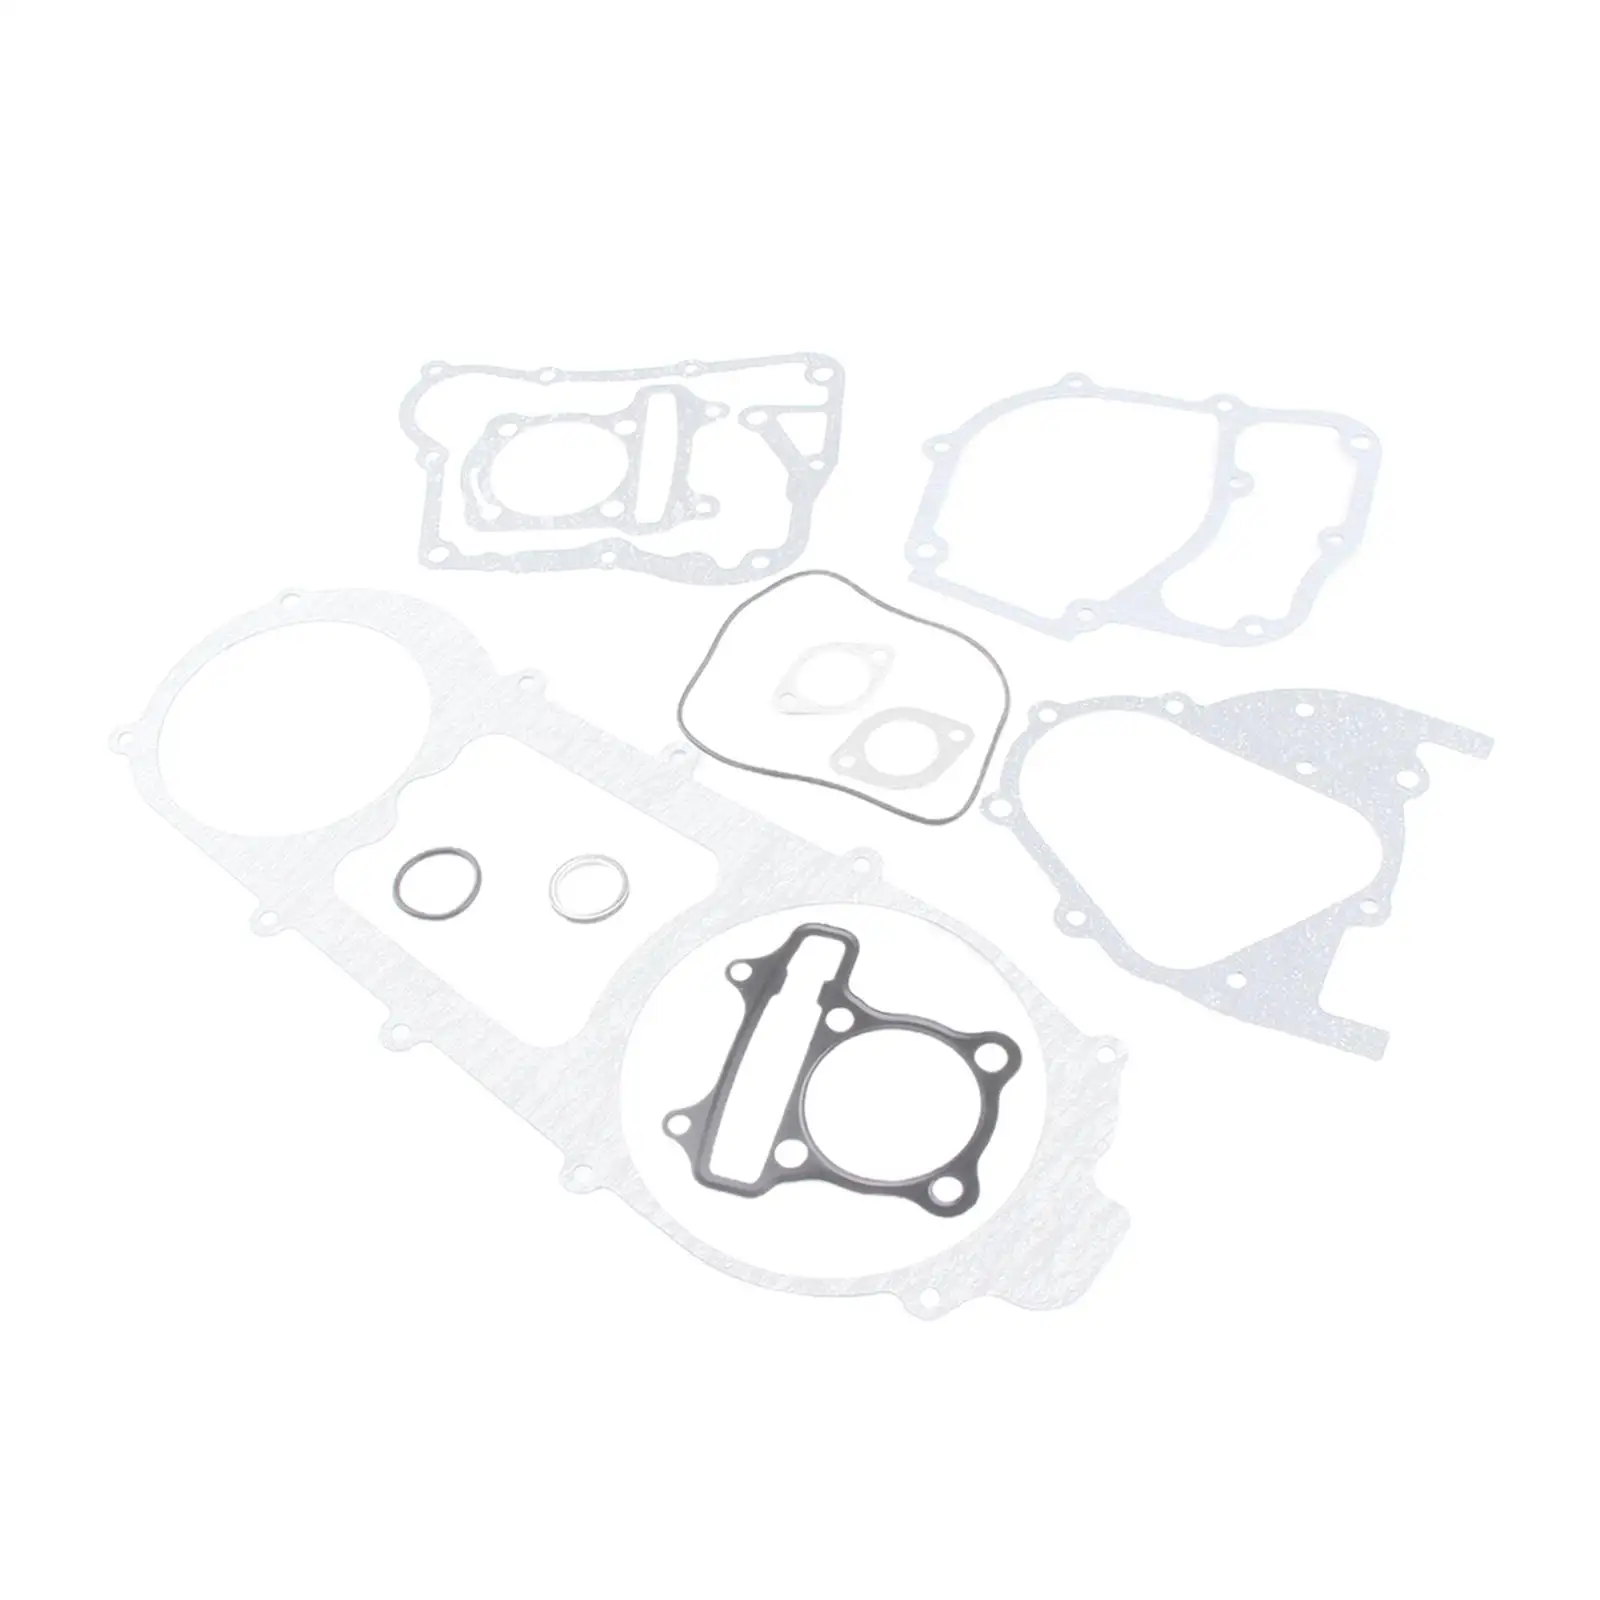 Complete Engine Head Gasket Set for GY6 150cc Moped Scooters Go Karts QuadTop Quality Guaranteed.